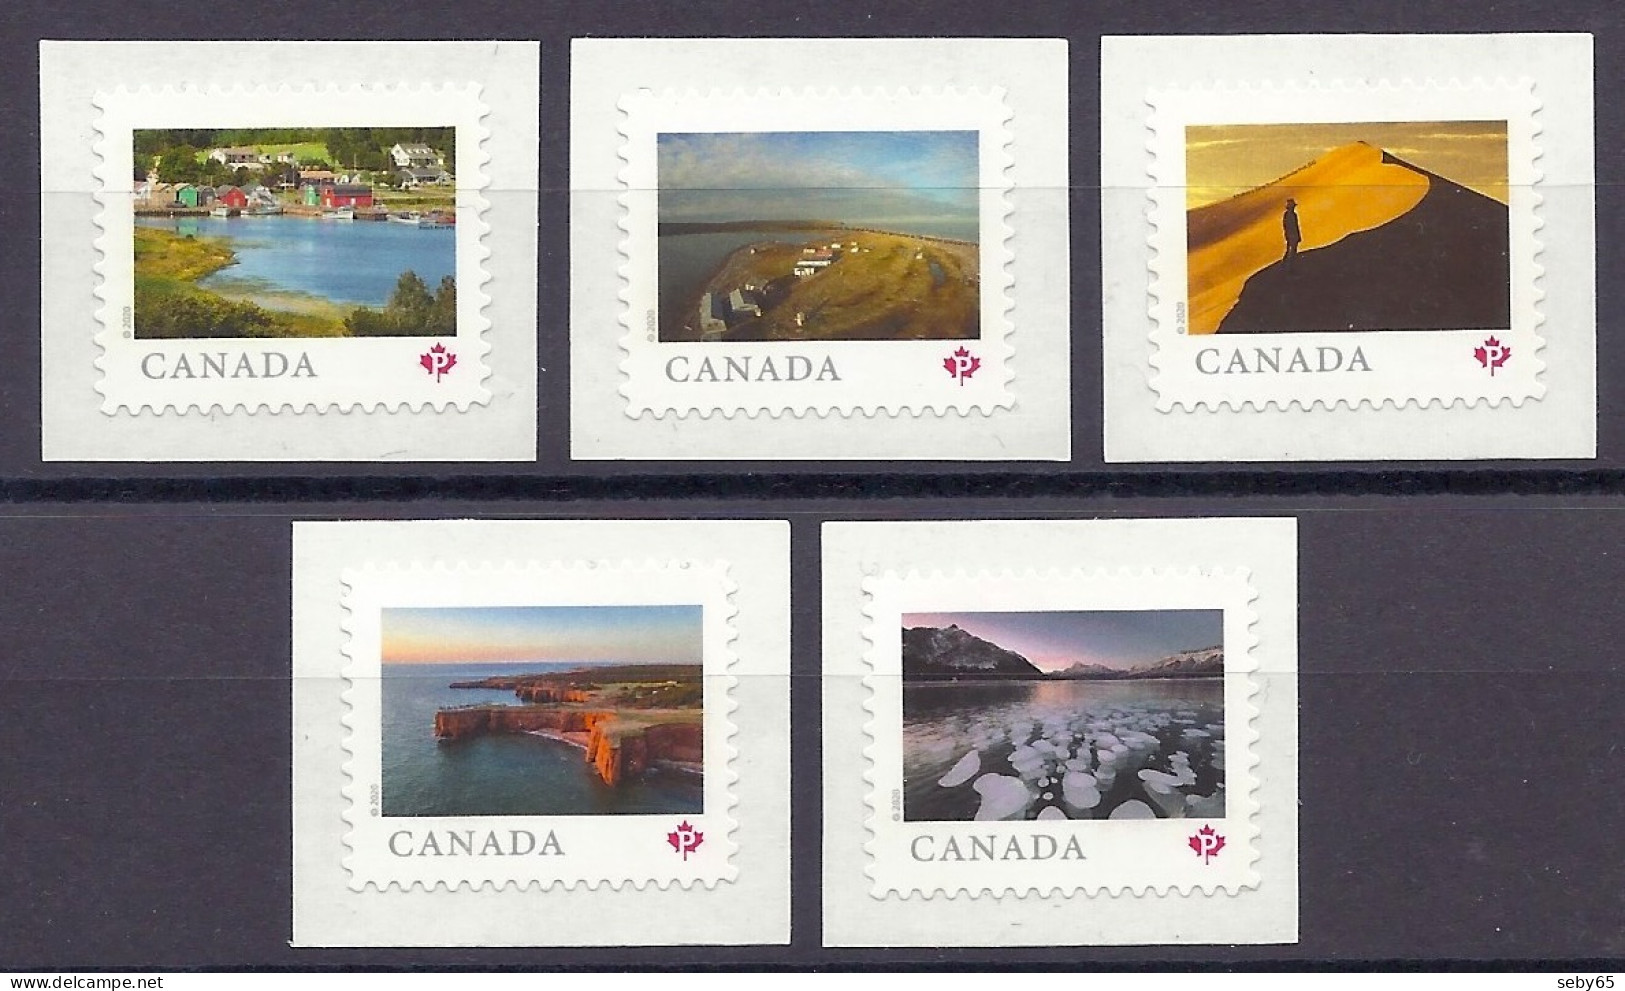 Canada 2020 - From Far And Wide, Scenic Views, Scenery Landscapes, Paysages, National Parks, Parc, Mountains - MNH - Nuevos